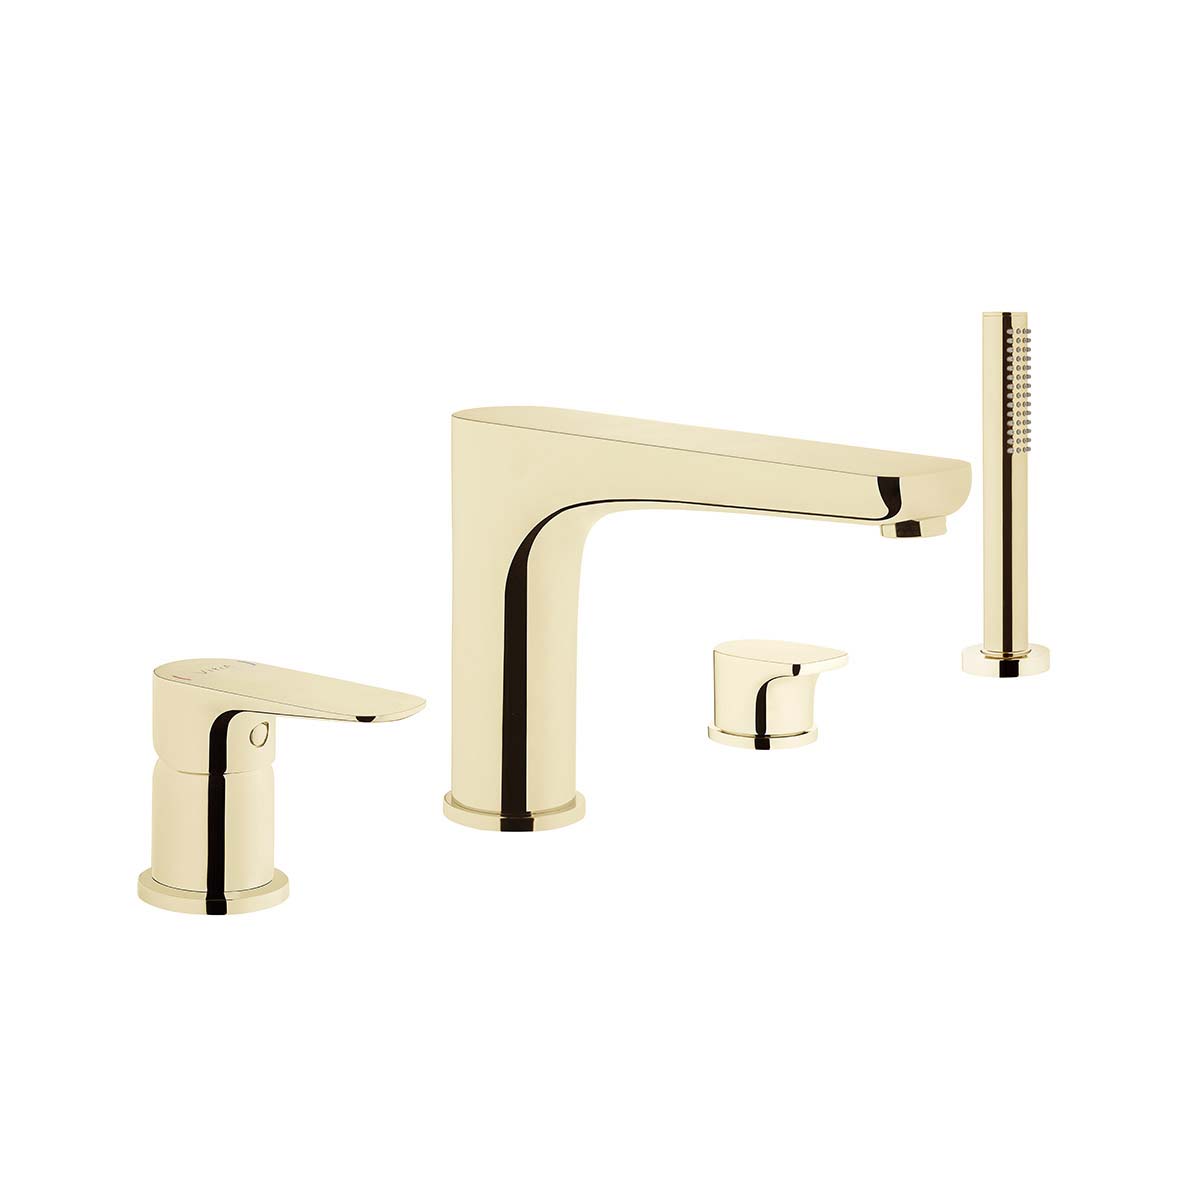 Bath mixer (for 4-hole bathtubs-deck mounted with handshower)